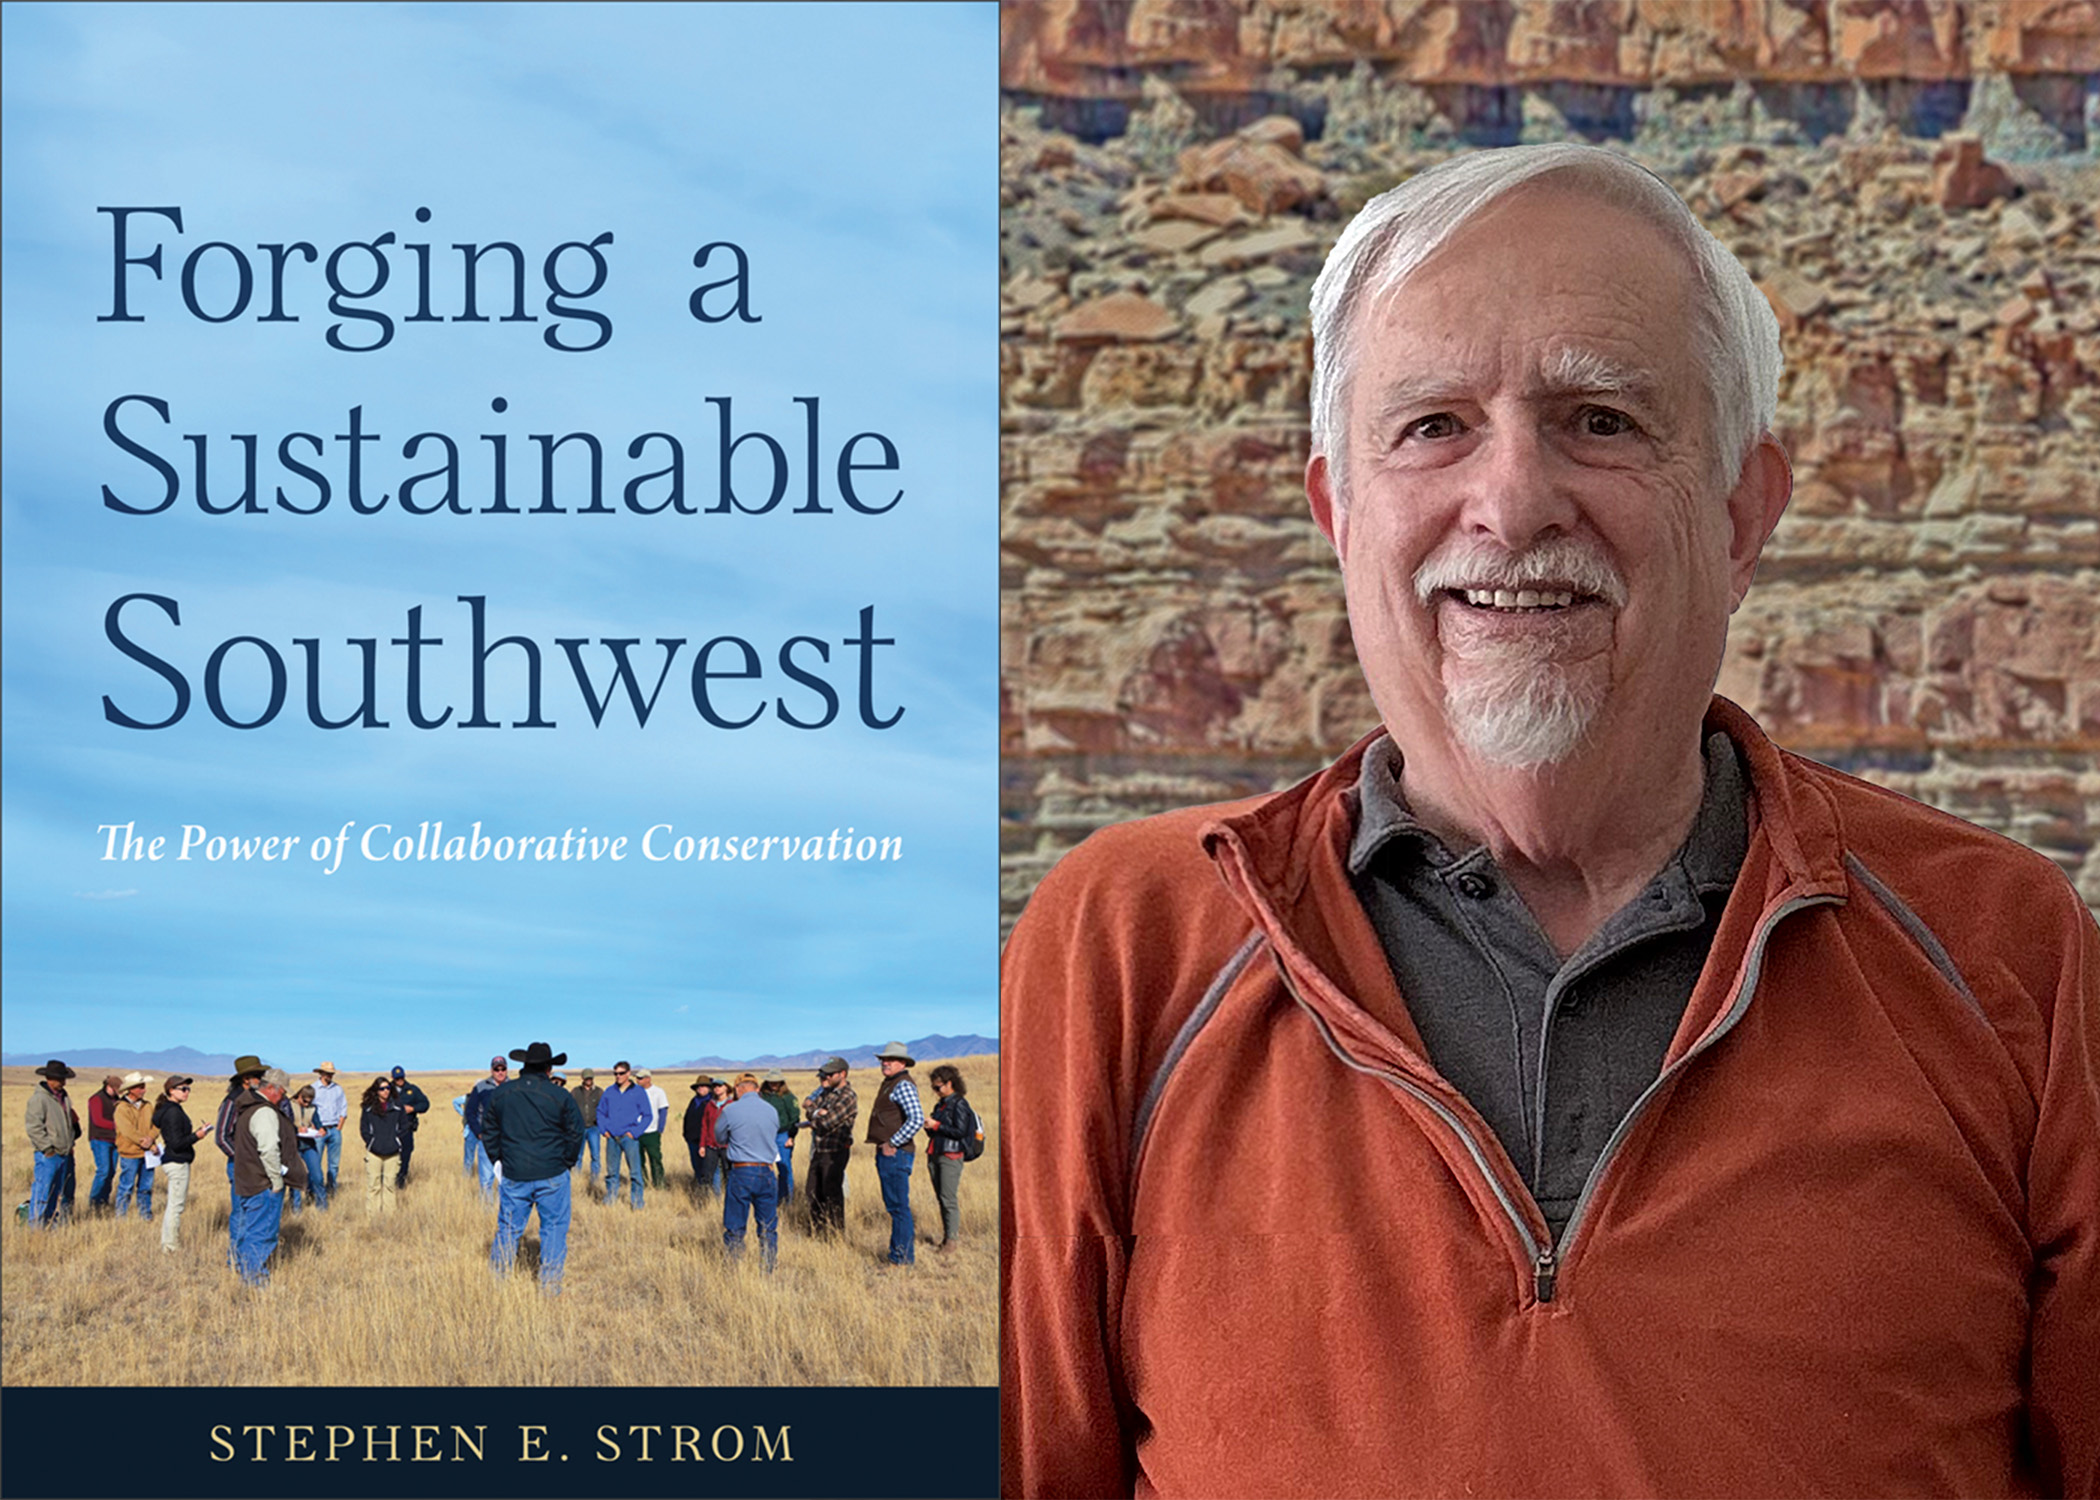 Cover of "Forging a Sustainable Southwest" and photograph of author Stephen Strom